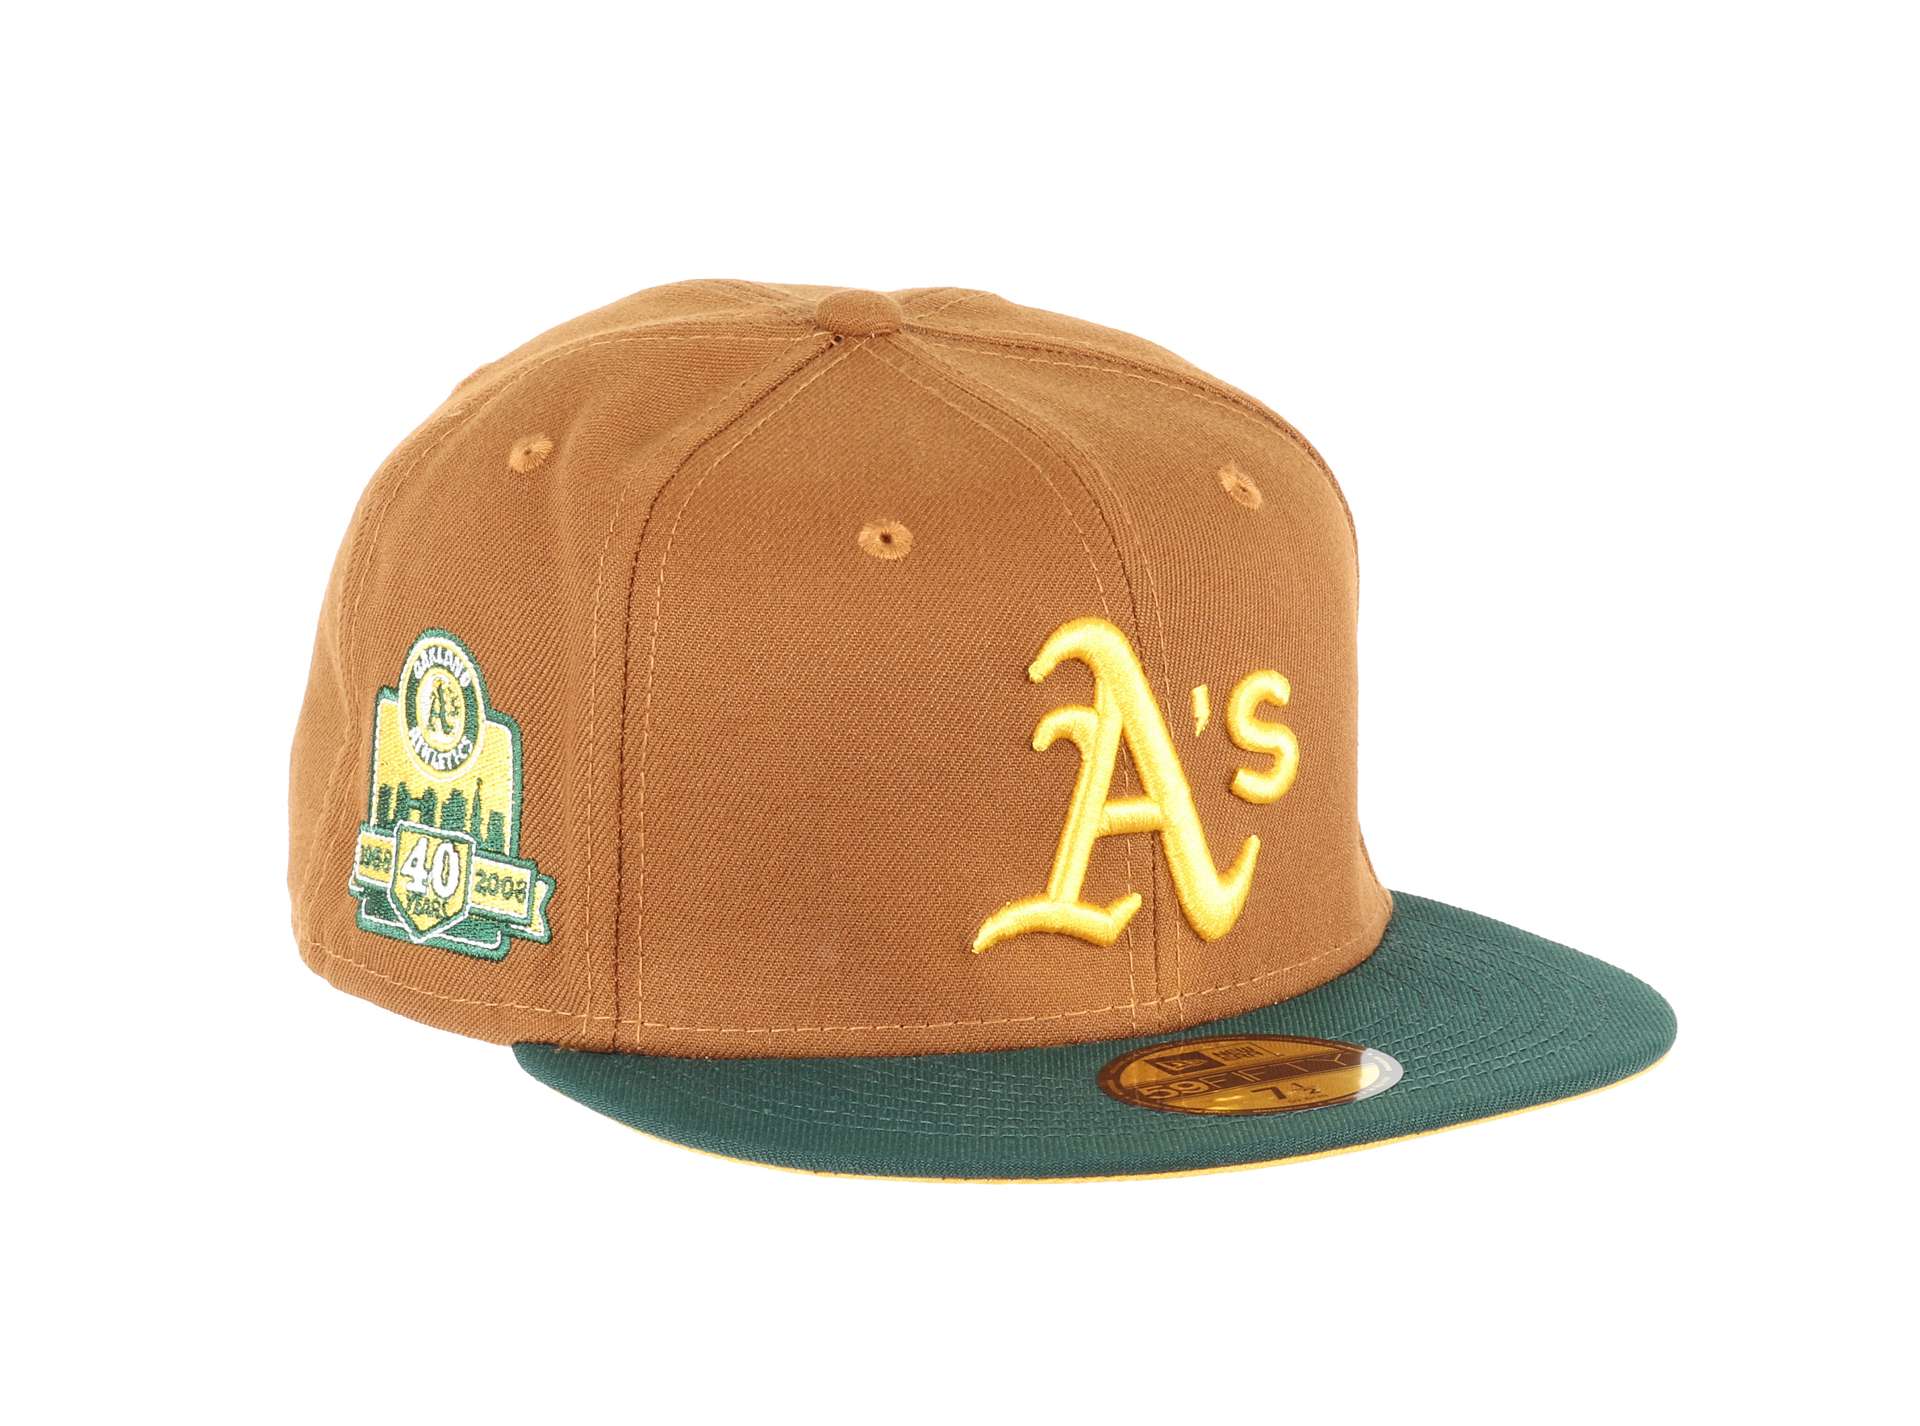 Oakland Athletics MLB Cooperstown 40th Anniversary Sidepatch Peanut 59Fifty Basecap New Era